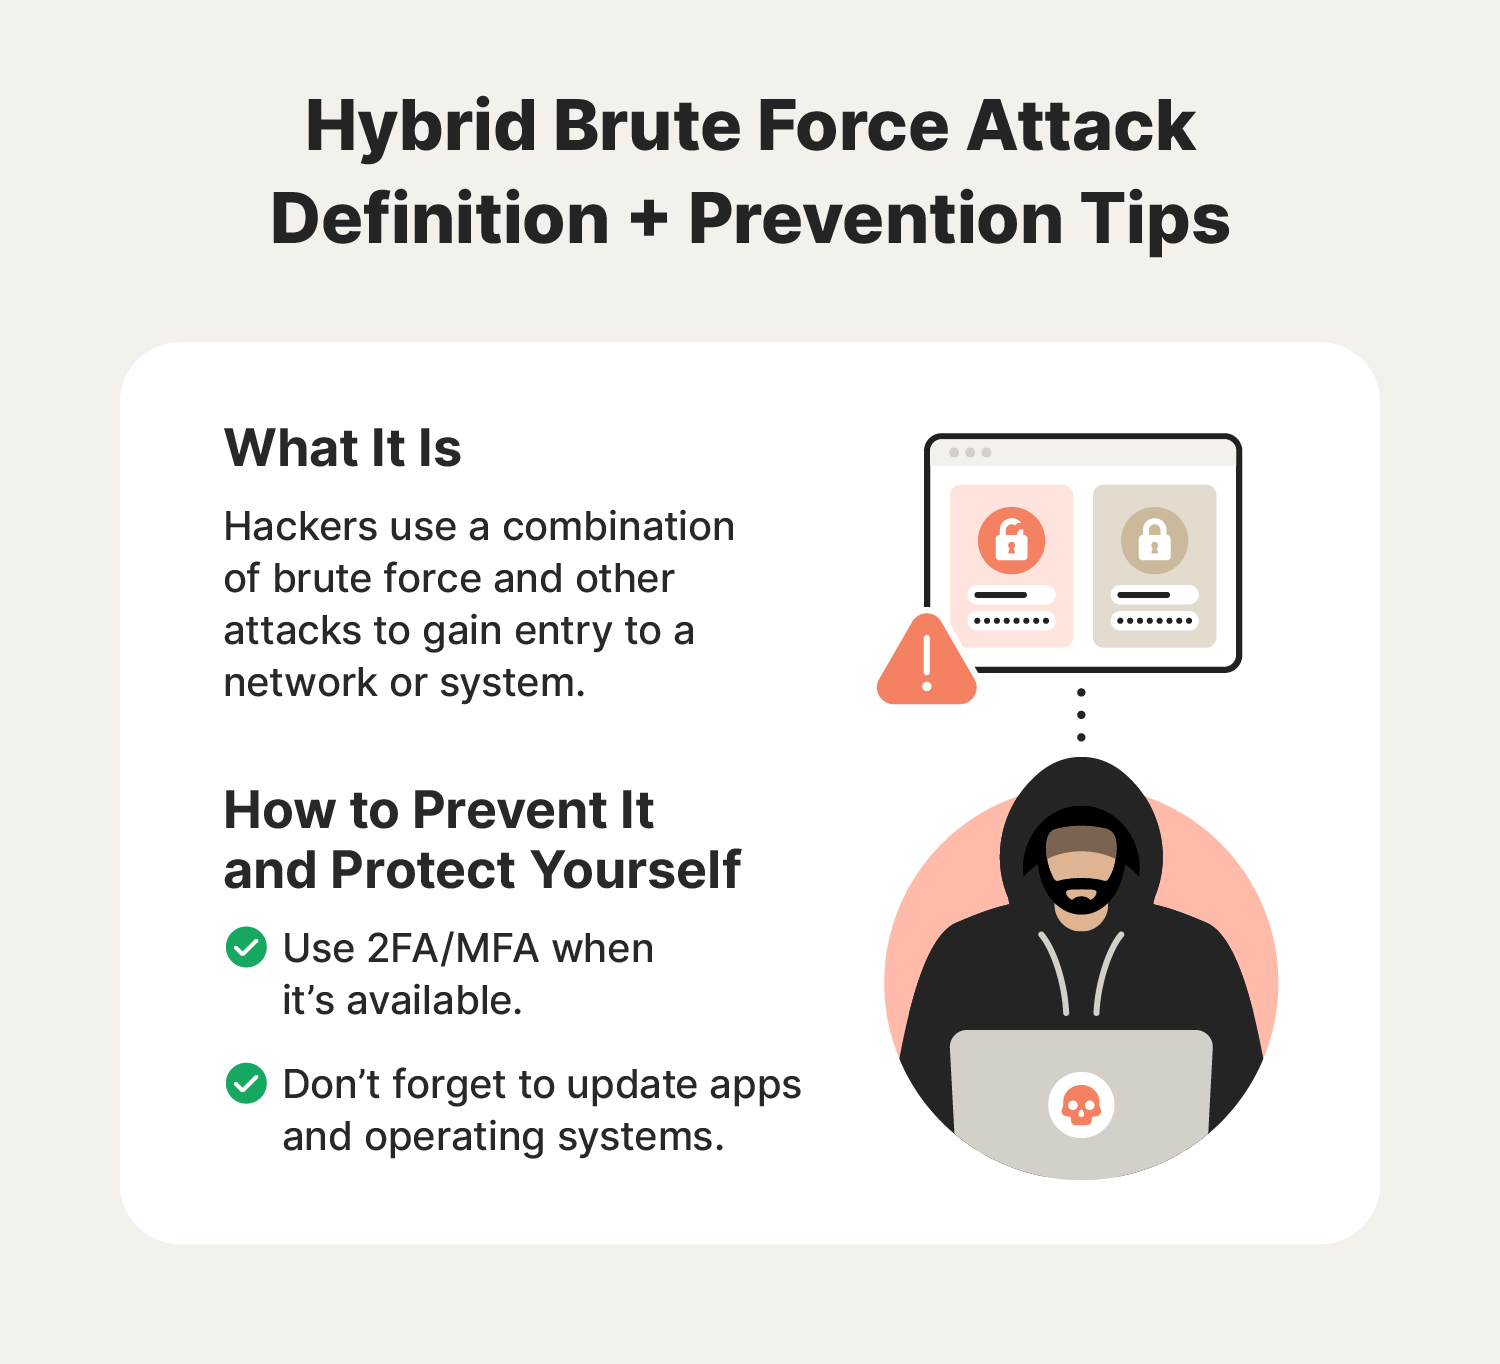 Illustrated chart defining hybrid brute force attacks with prevention and protection tips.